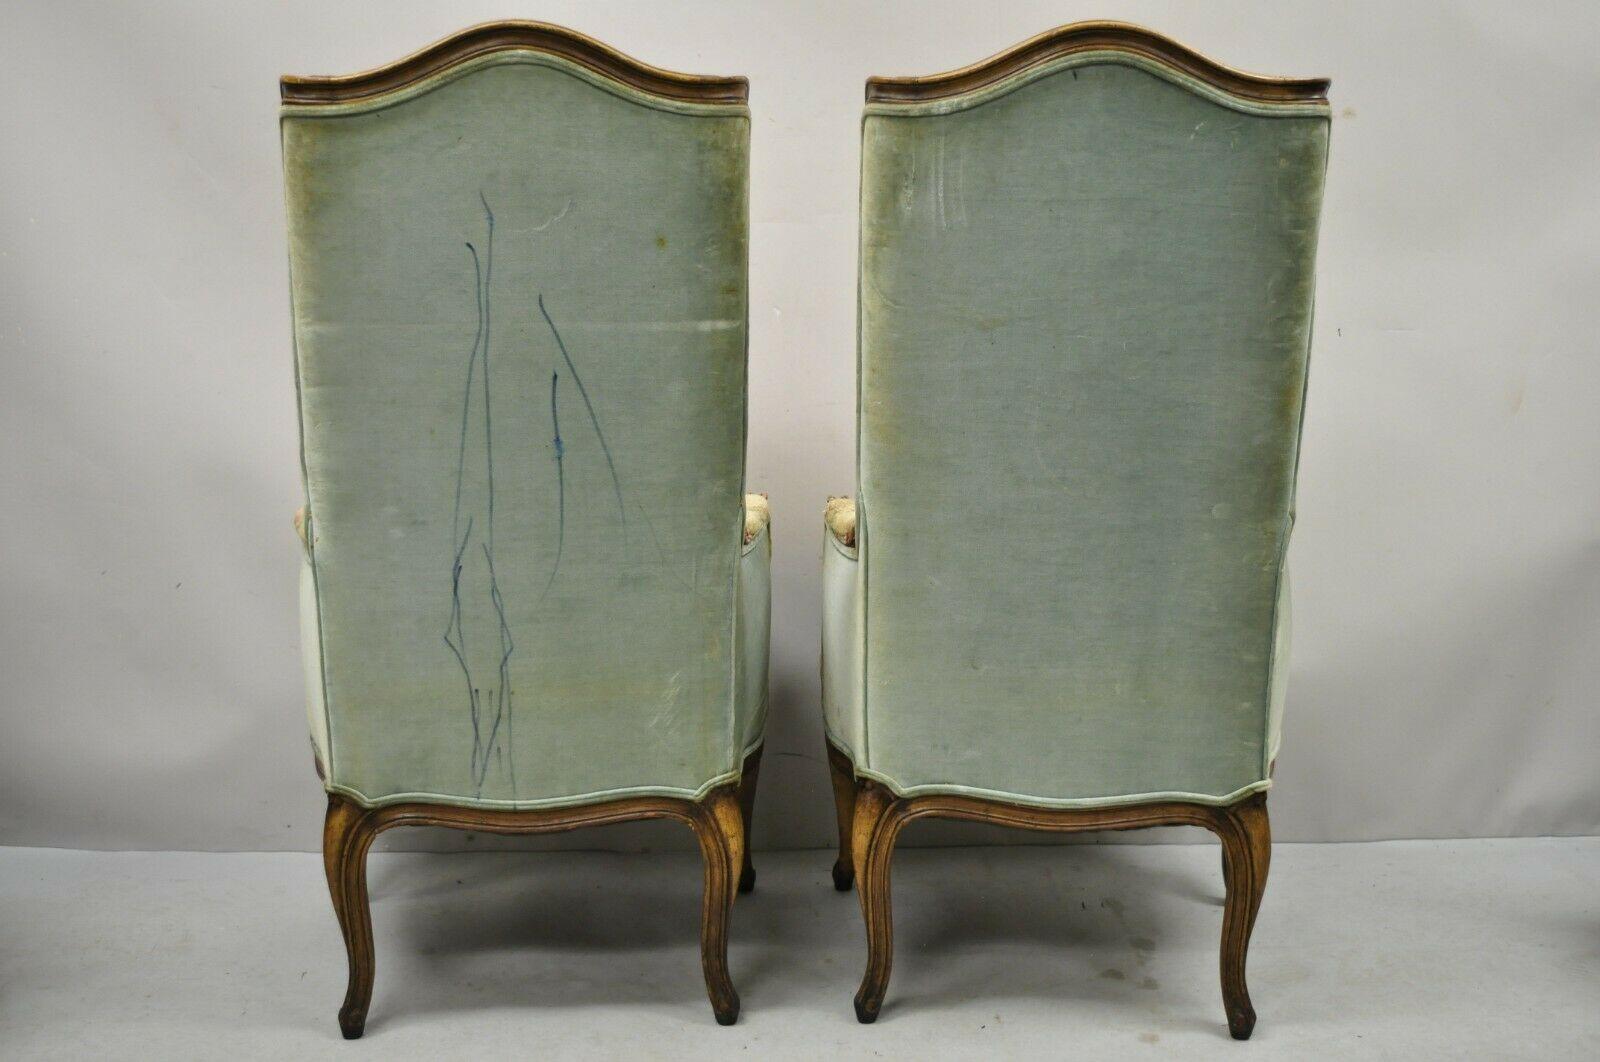 Vintage French Provincial Louis XV Country Narrow Tall Back Chairs 'B' - a Pair For Sale 4